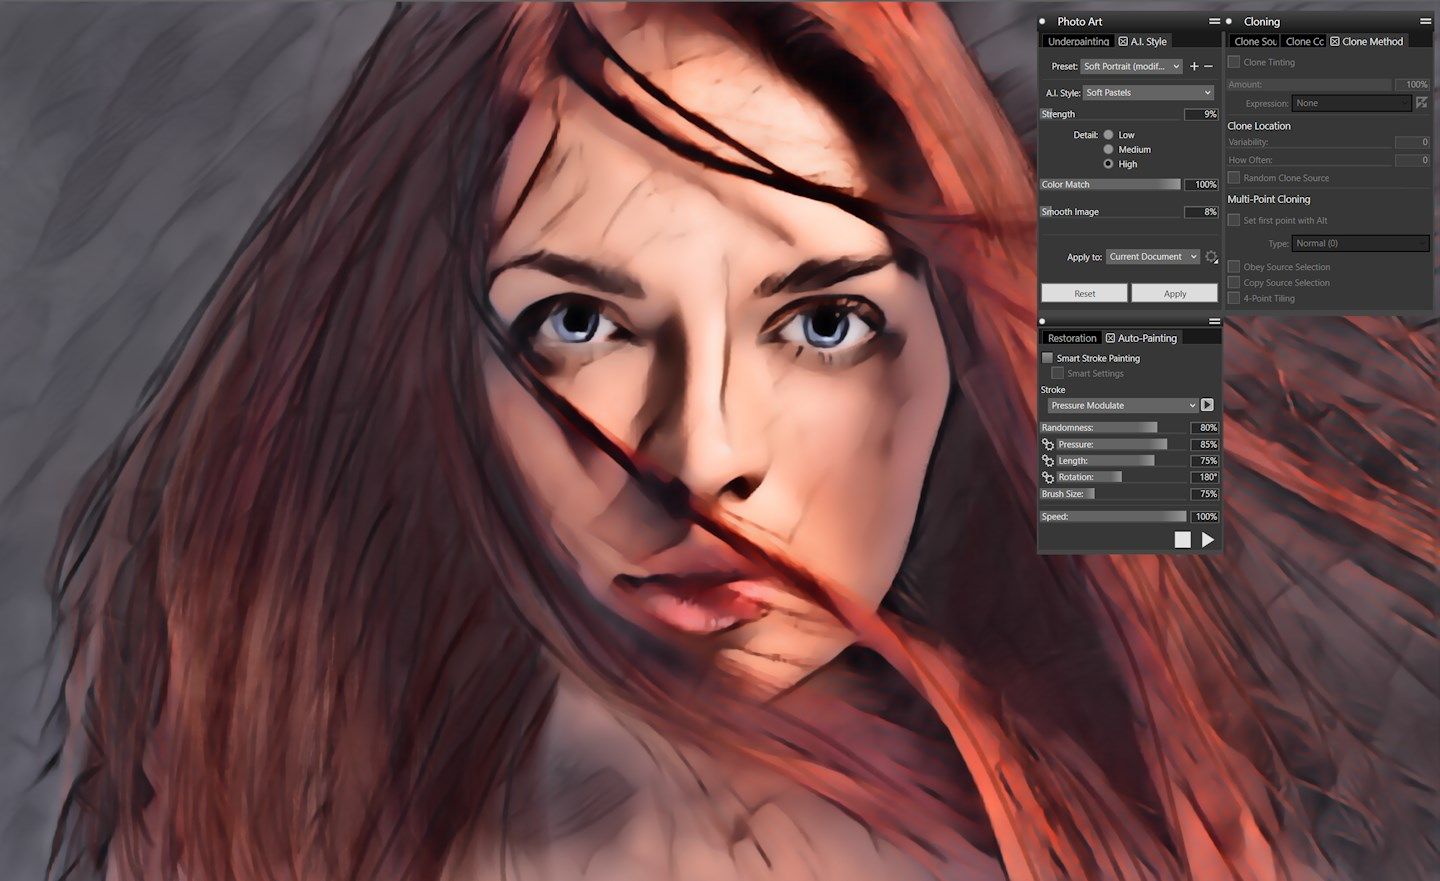 Photo Art Tools - From artificial intelligence based style transfer to complex cloning workflow, find all the tools to transform your images into paintings.